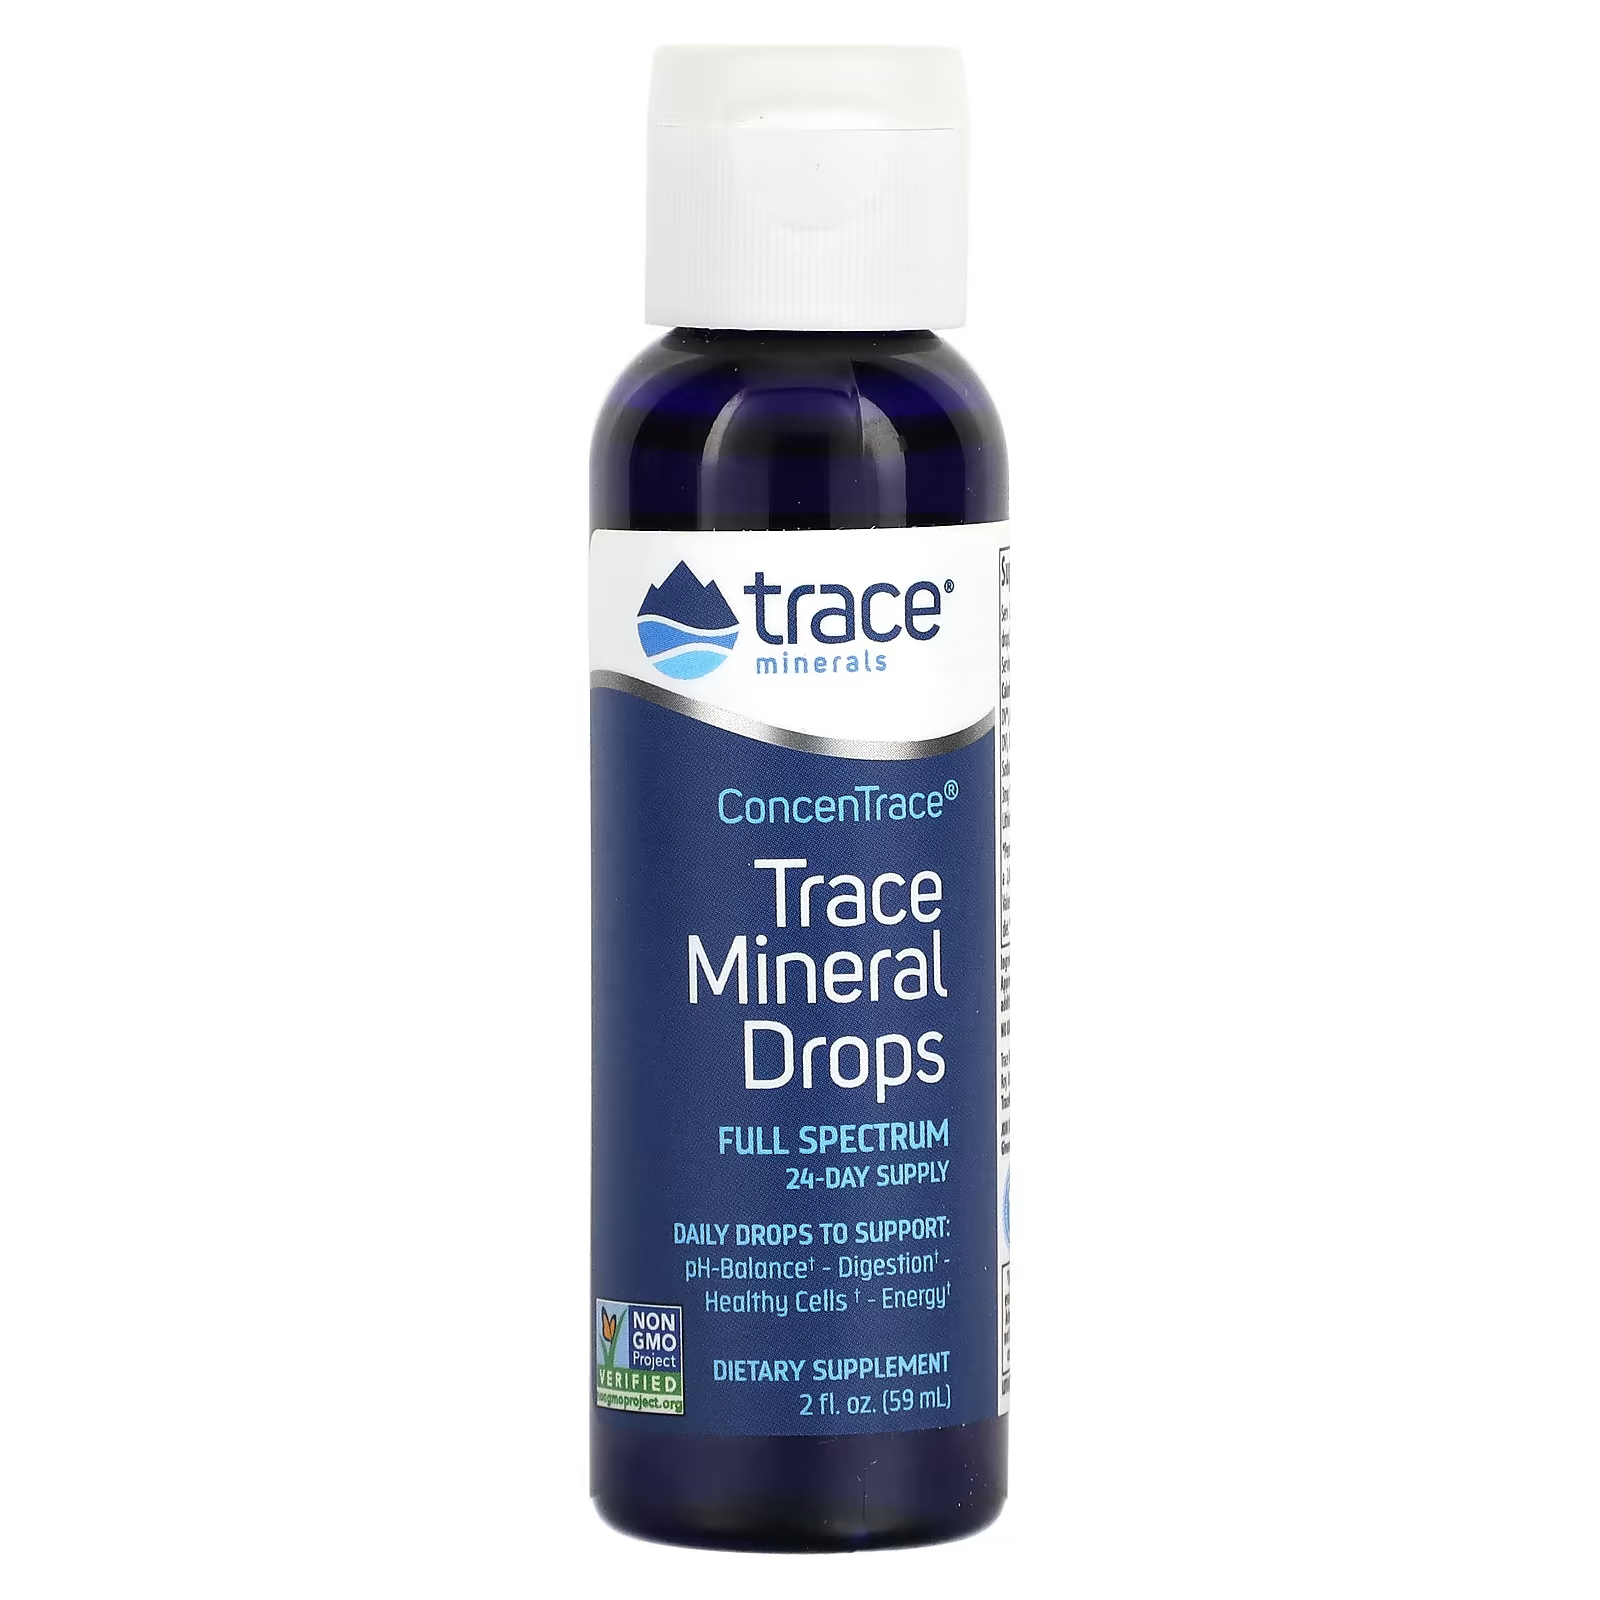 Капли Trace Minerals Concentrace с микроэлементами, 59 мл trace minerals concentrace микроэлементы в каплях 15 мл